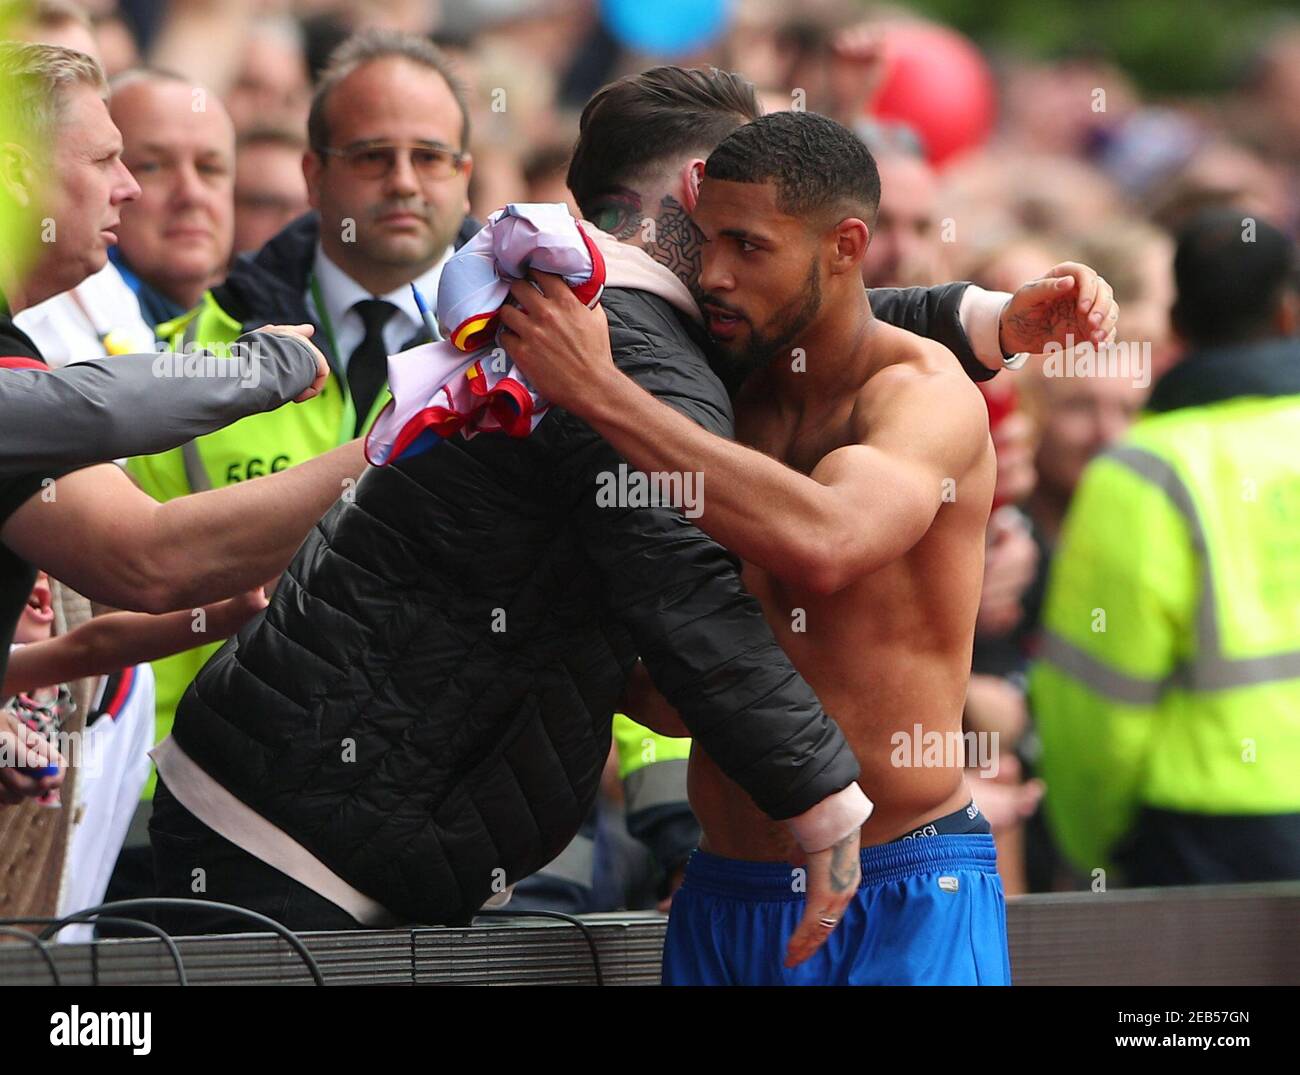 Soccer Football - Premier League - Crystal Palace vs West Bromwich Albion - Selhurst Park, London, Britain - May 13, 2018   Crystal Palace's Ruben Loftus-Cheek with a fan after the match   REUTERS/Hannah McKay    EDITORIAL USE ONLY. No use with unauthorized audio, video, data, fixture lists, club/league logos or "live" services. Online in-match use limited to 75 images, no video emulation. No use in betting, games or single club/league/player publications.  Please contact your account representative for further details. Stock Photo